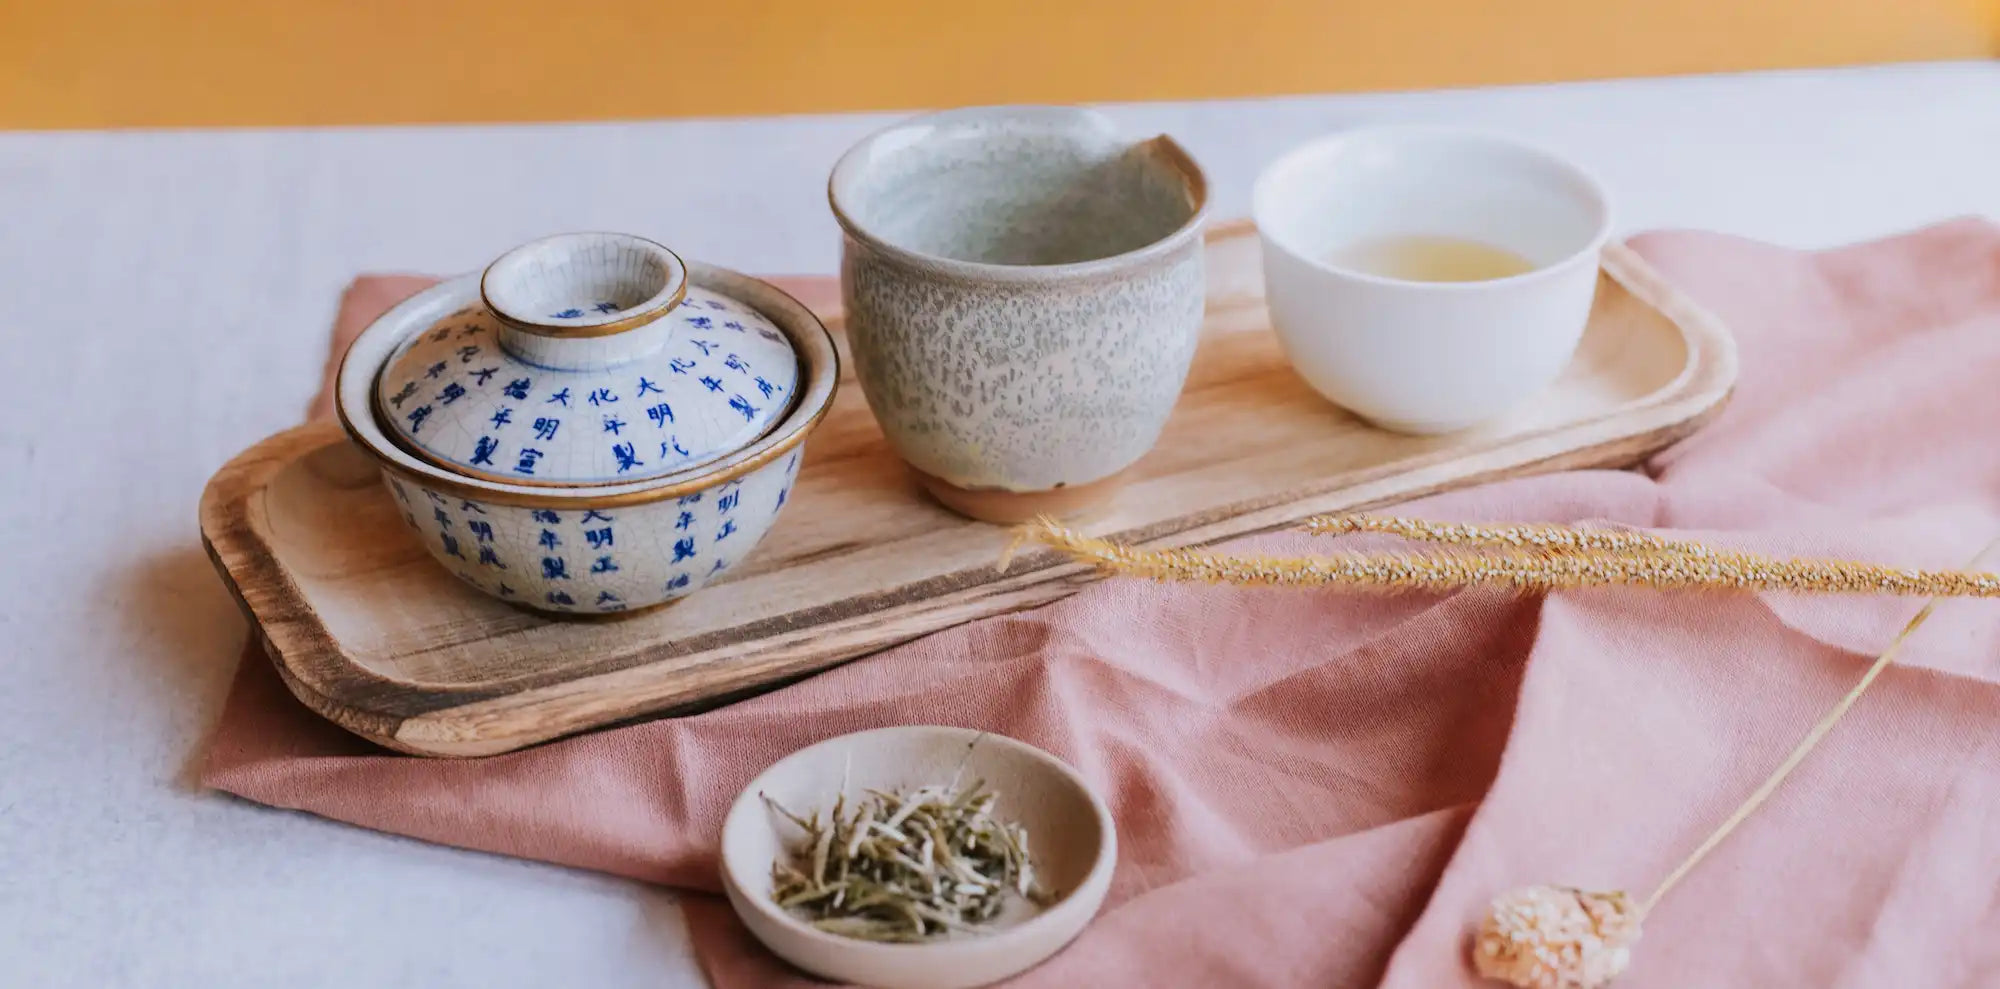 gaiwan with silverneedle white tea and white teacups on a wooden board